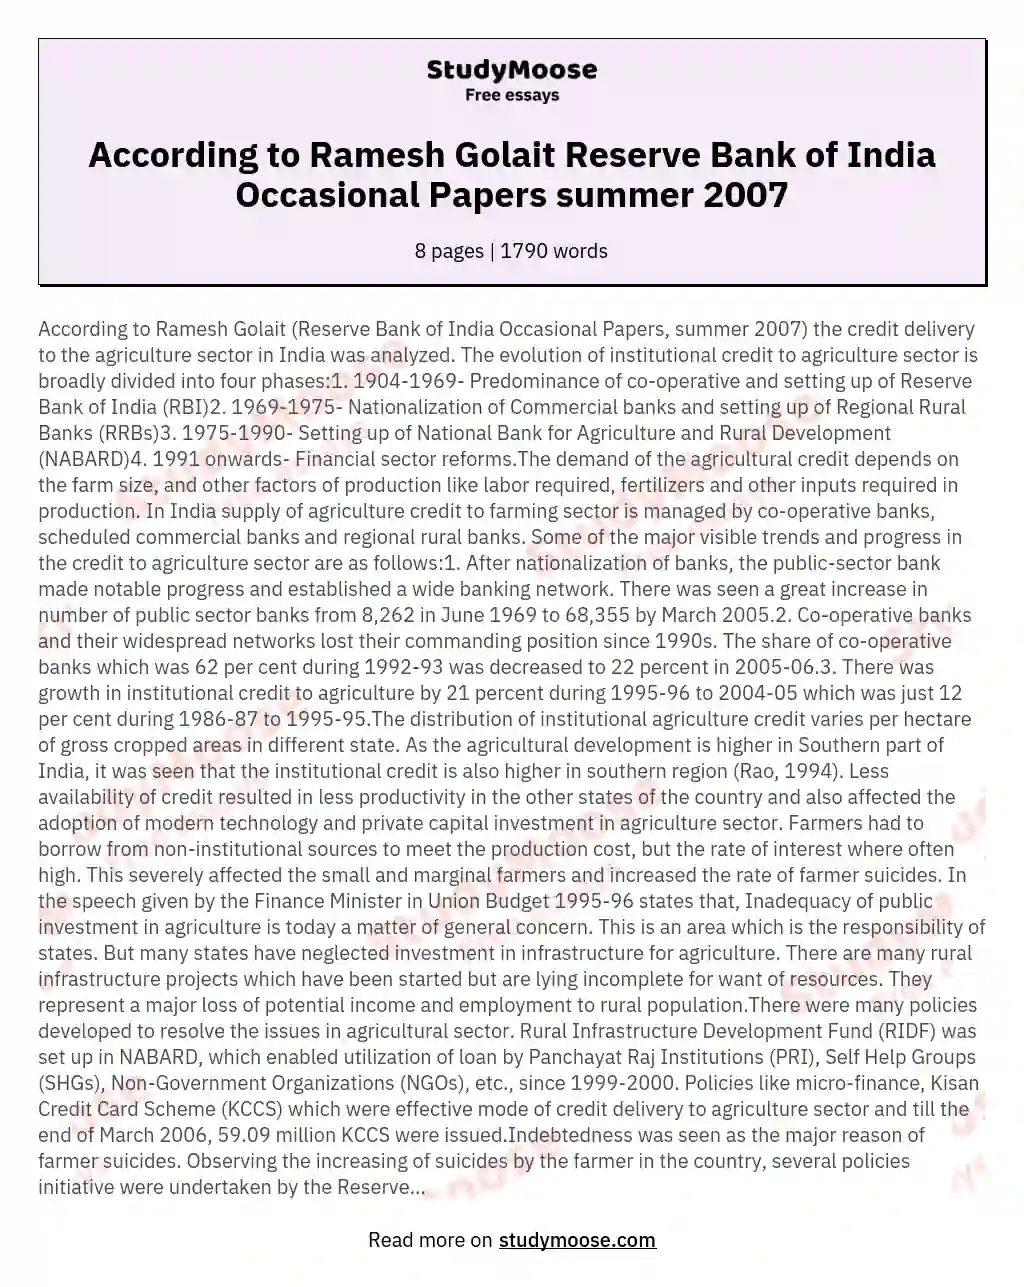 According to Ramesh Golait Reserve Bank of India Occasional Papers summer 2007